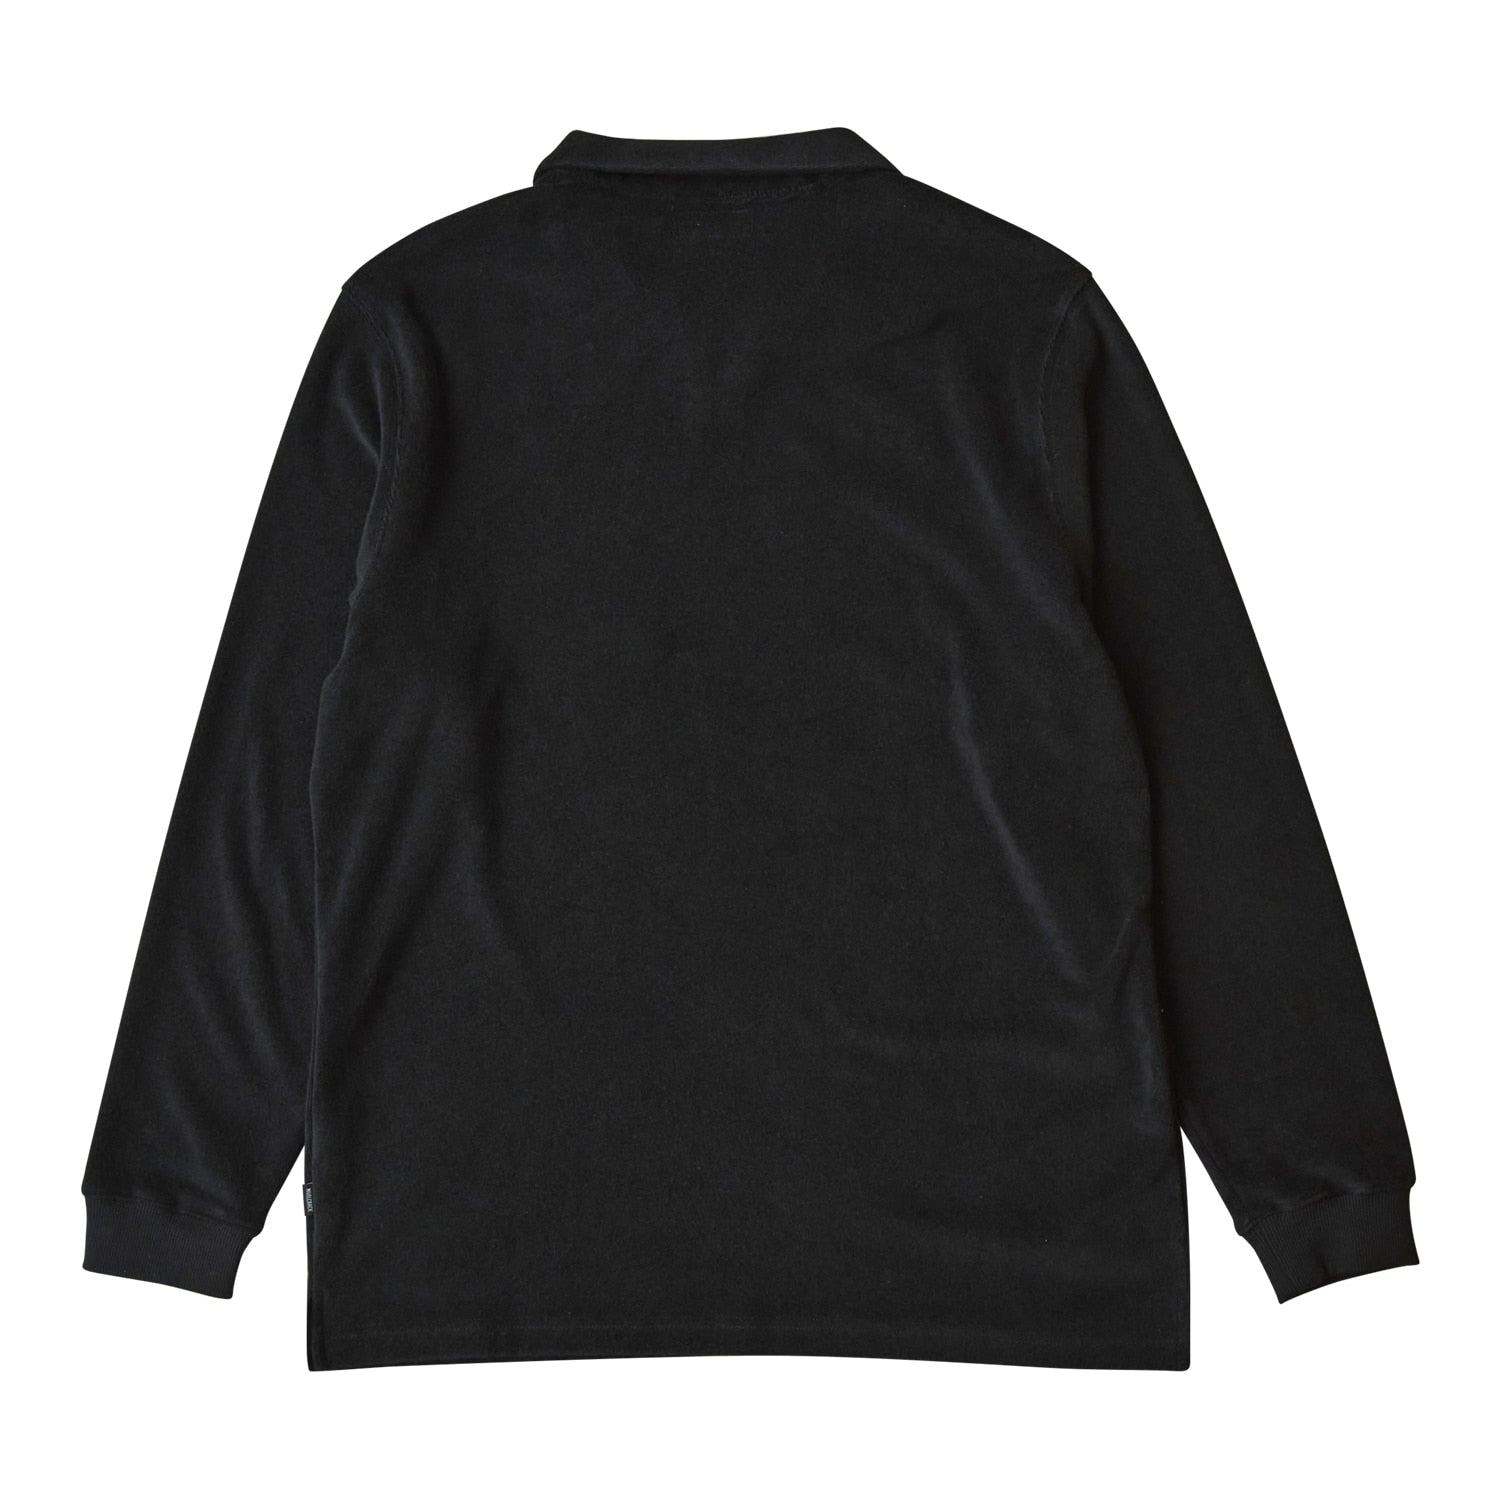 Nivelcrack Terry Drill Top - Black